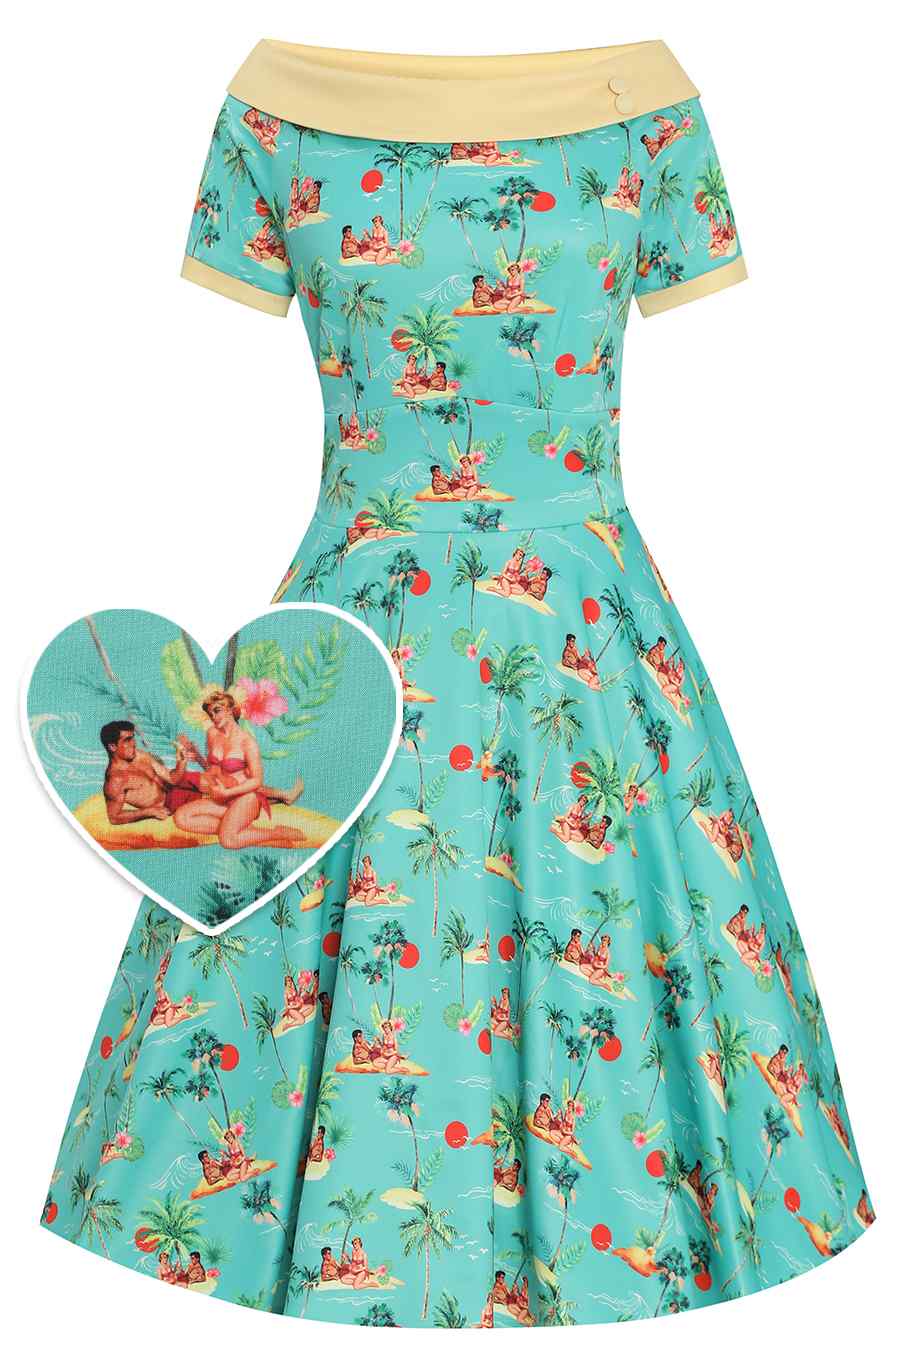 Front  View of Sunset Pinup Couple Swing Dress in Light Green